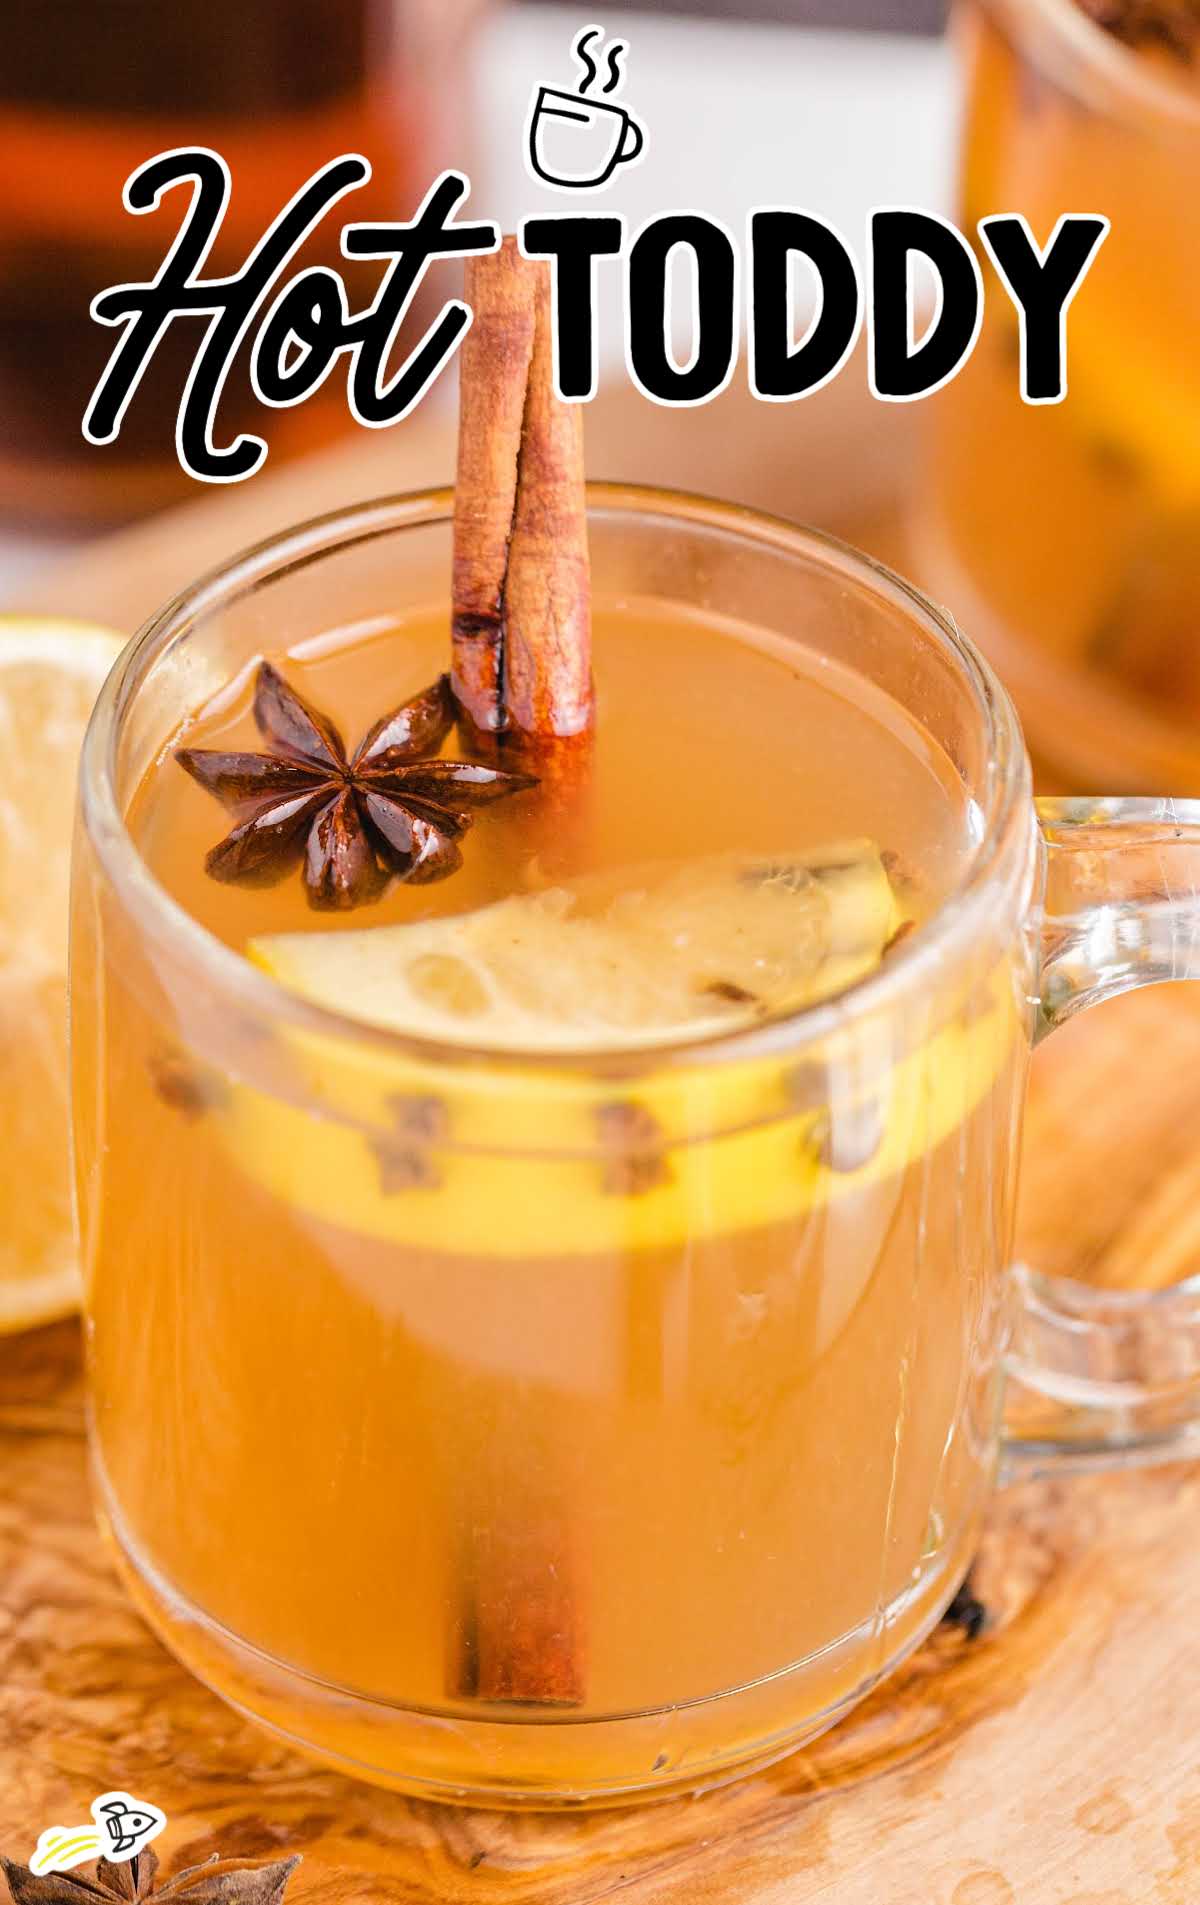 close up shot of a glass mug of Hot Toddy garnished with cinnamon, star anise, and lemon